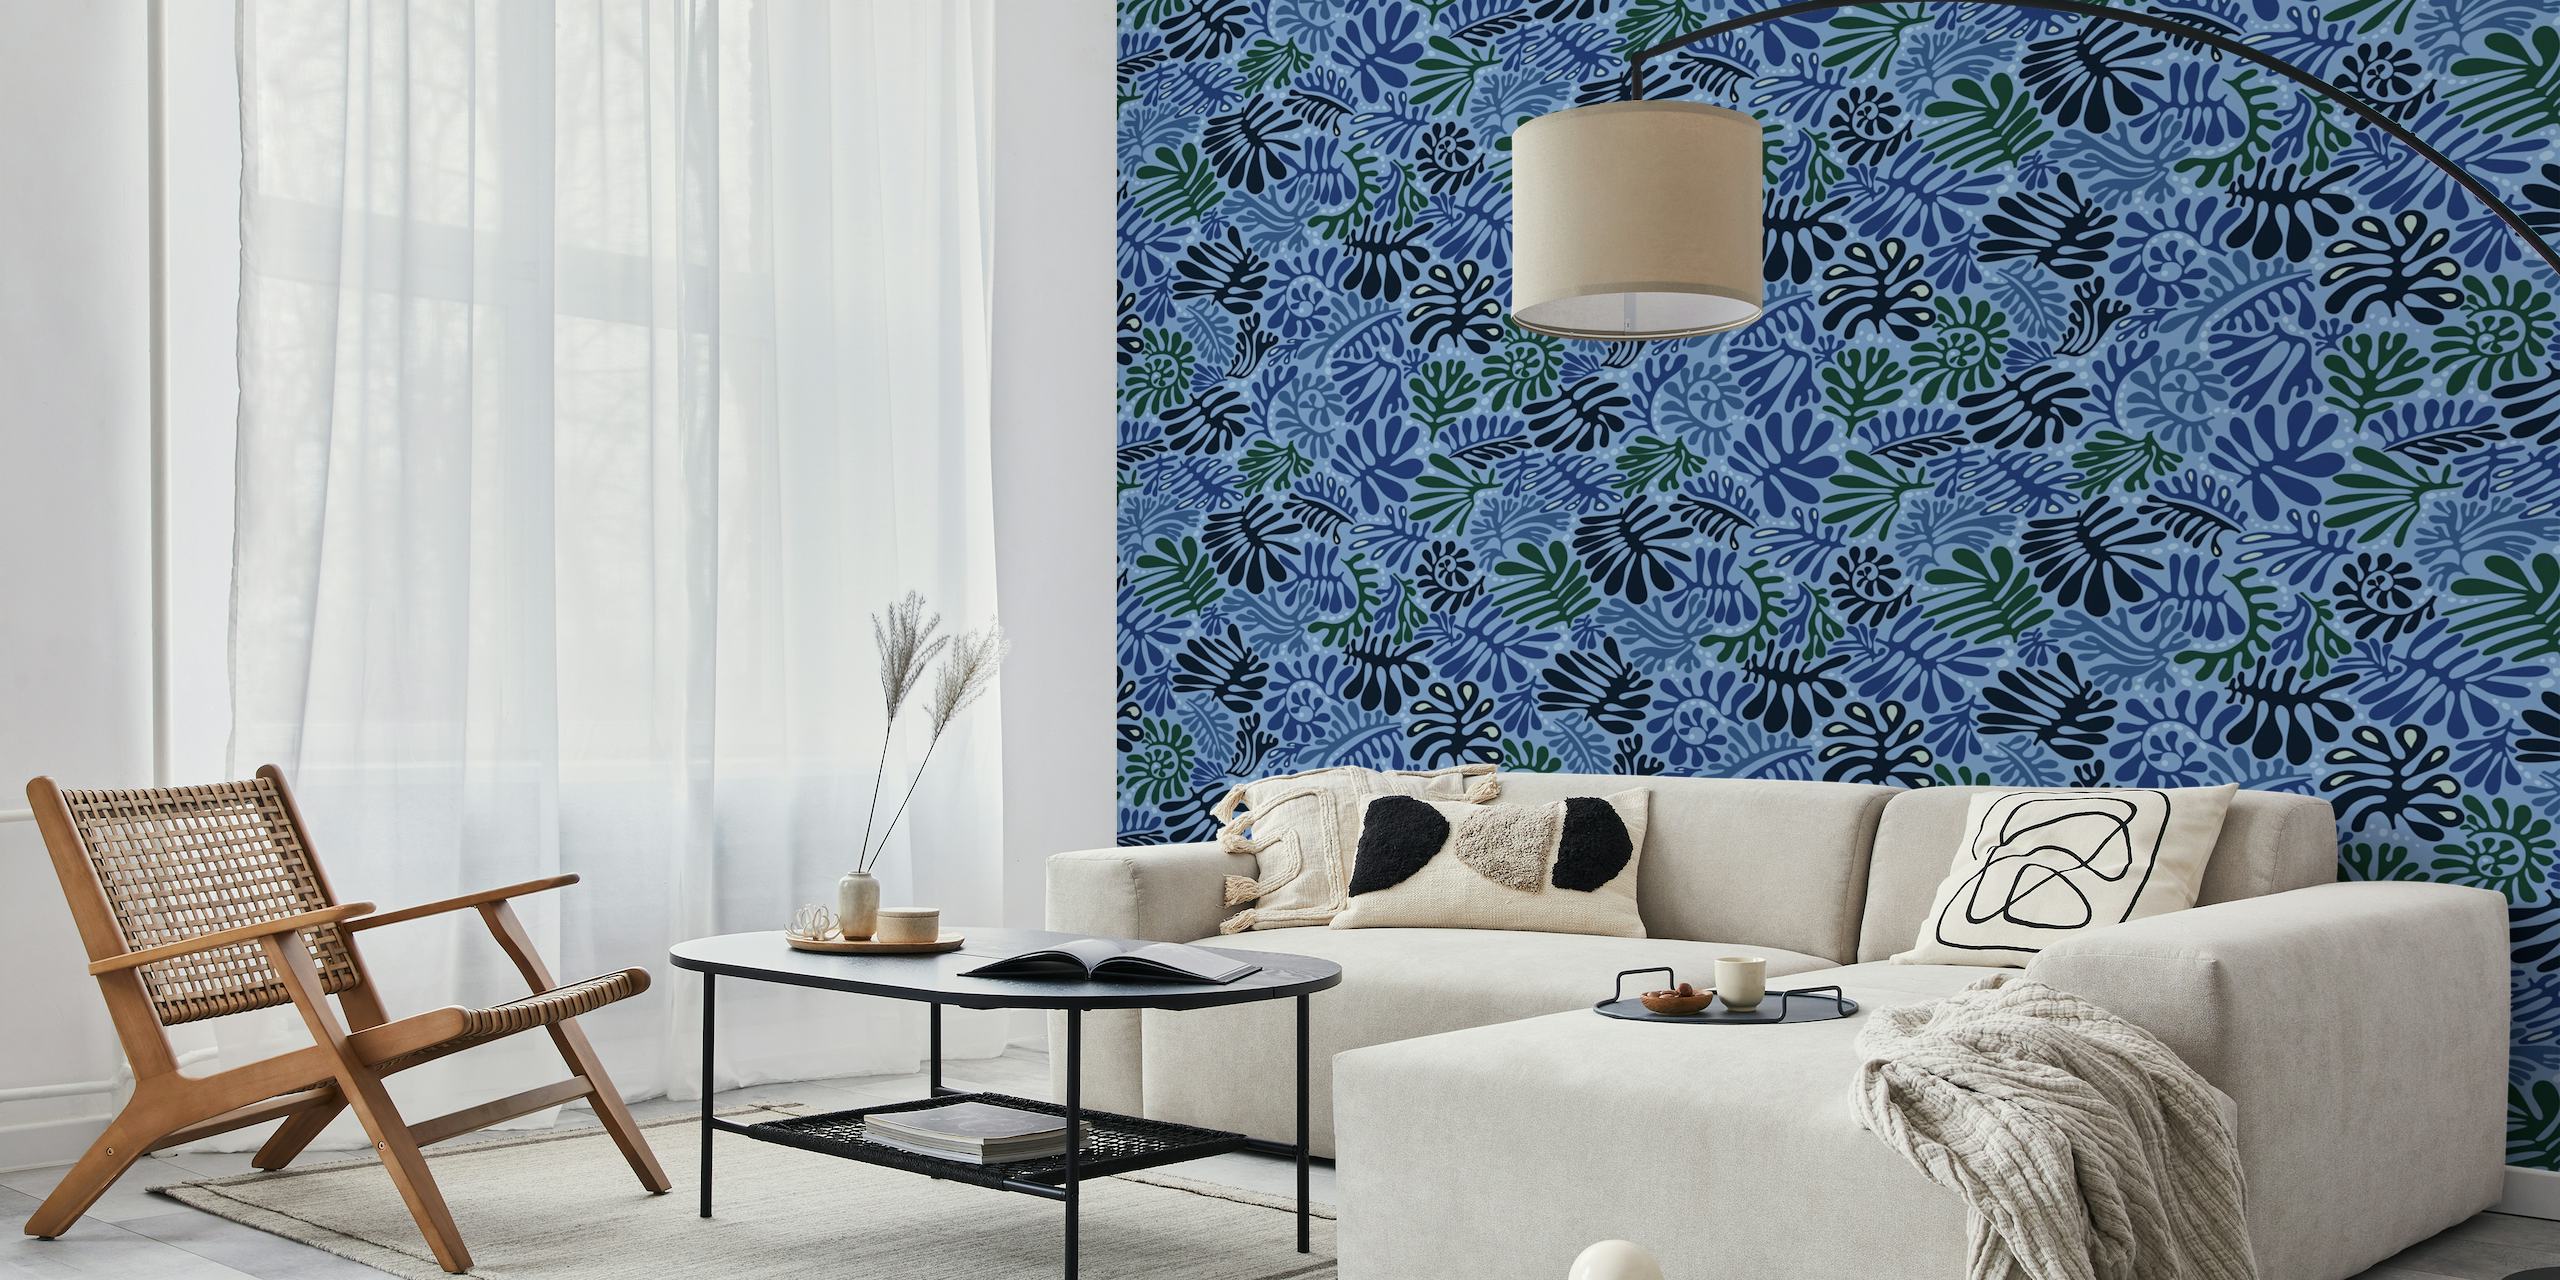 Stylish blue leaf-patterned wall mural from happywall.com with various shades of blue and plant cutout designs.